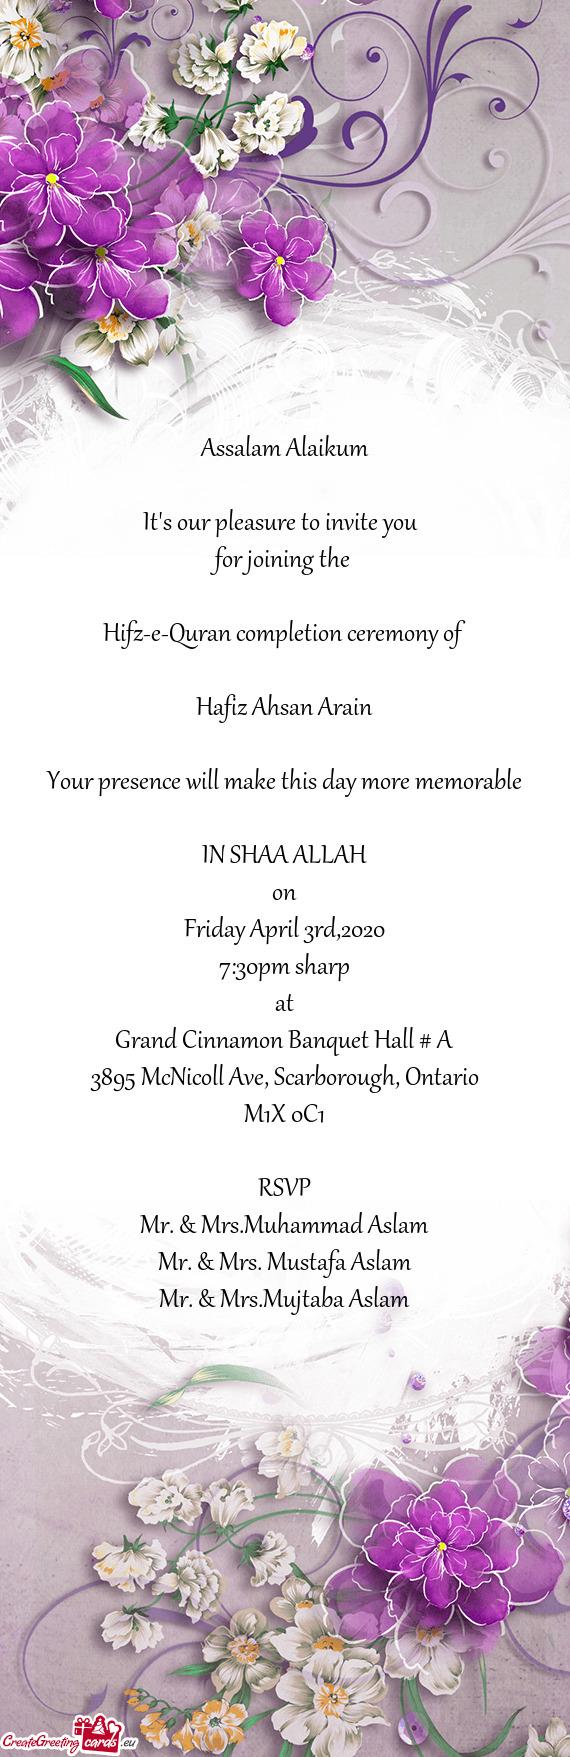 Hifz-e-Quran completion ceremony of